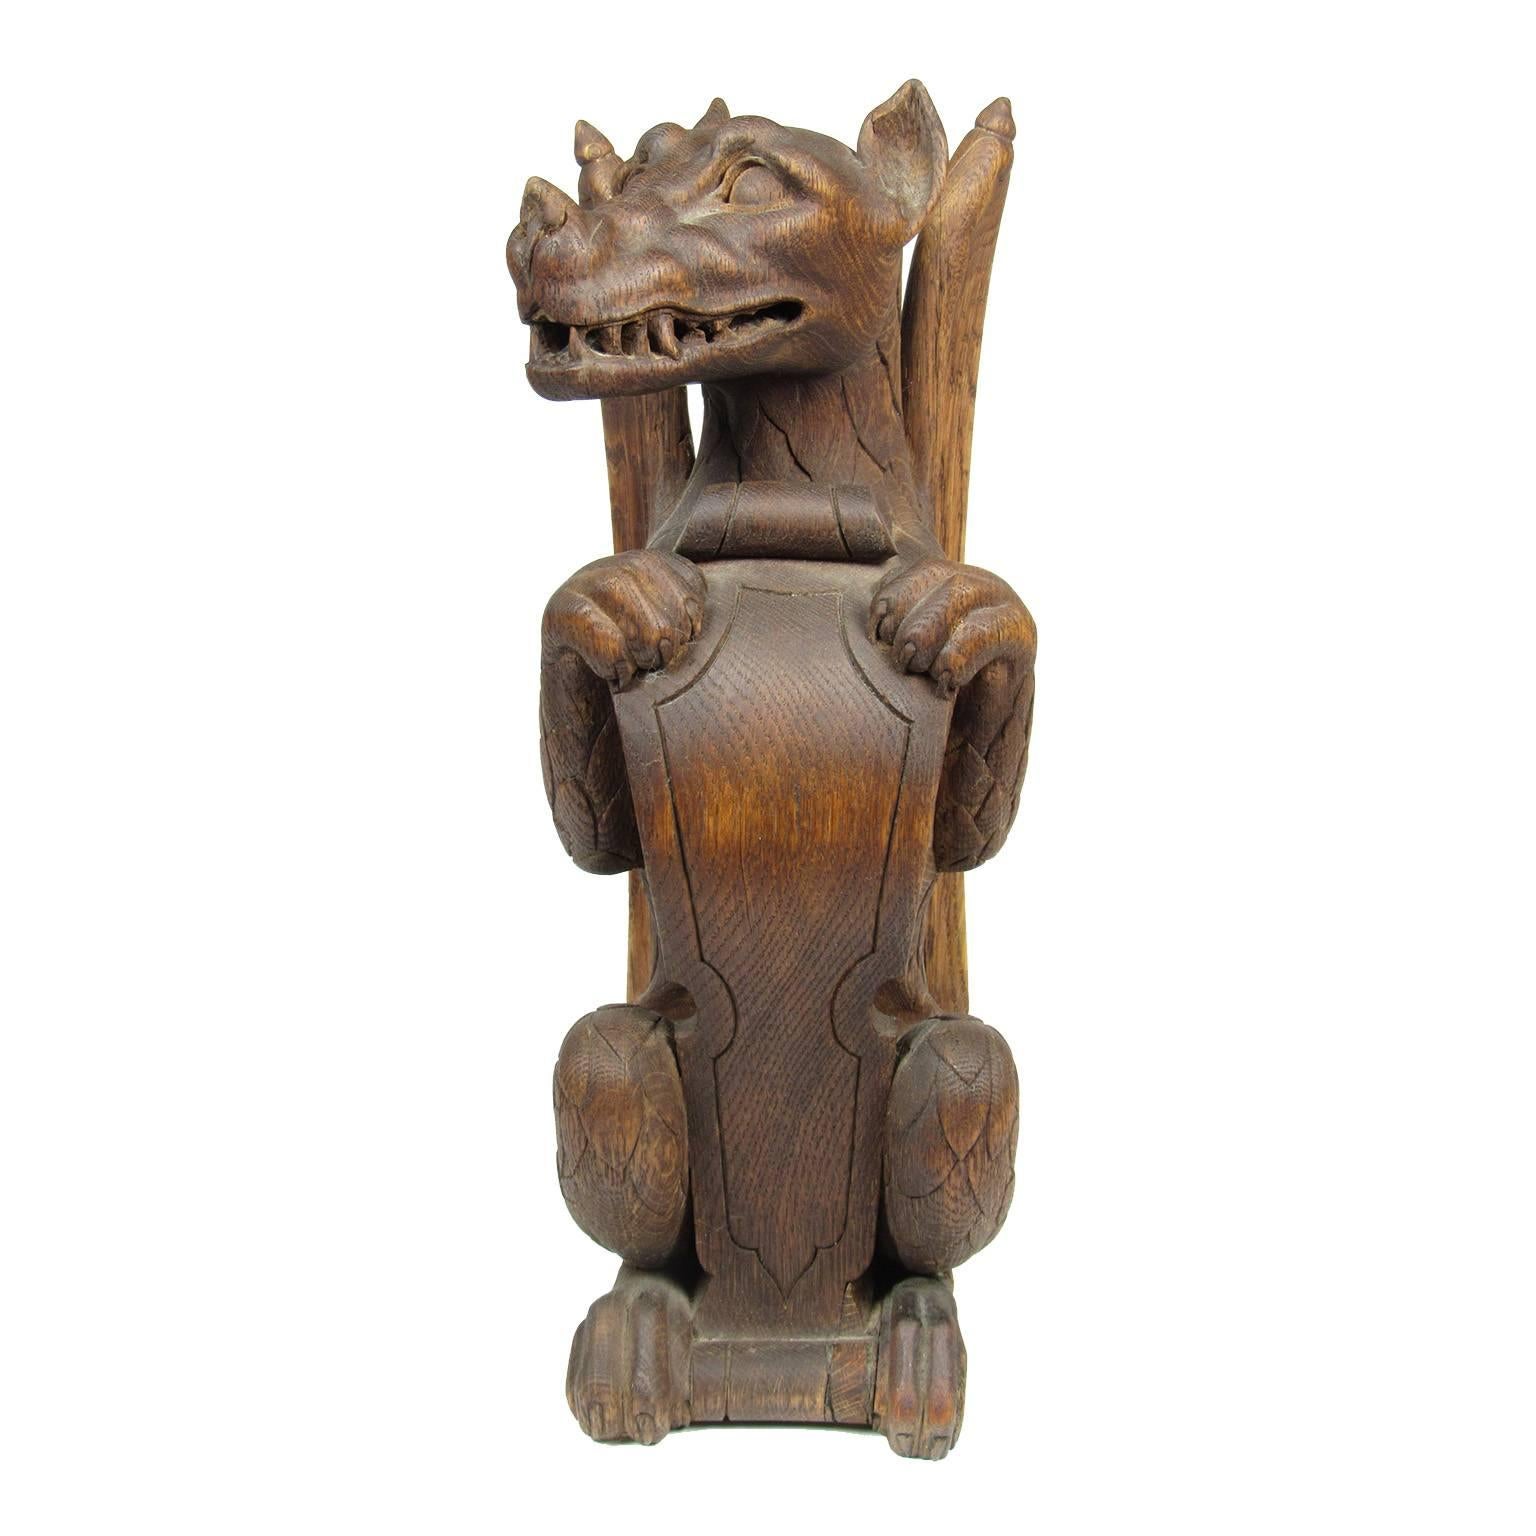 Rare 19th Century Carved Wood Figure of a Dragon Holding a Shield In Good Condition For Sale In Concord, MA